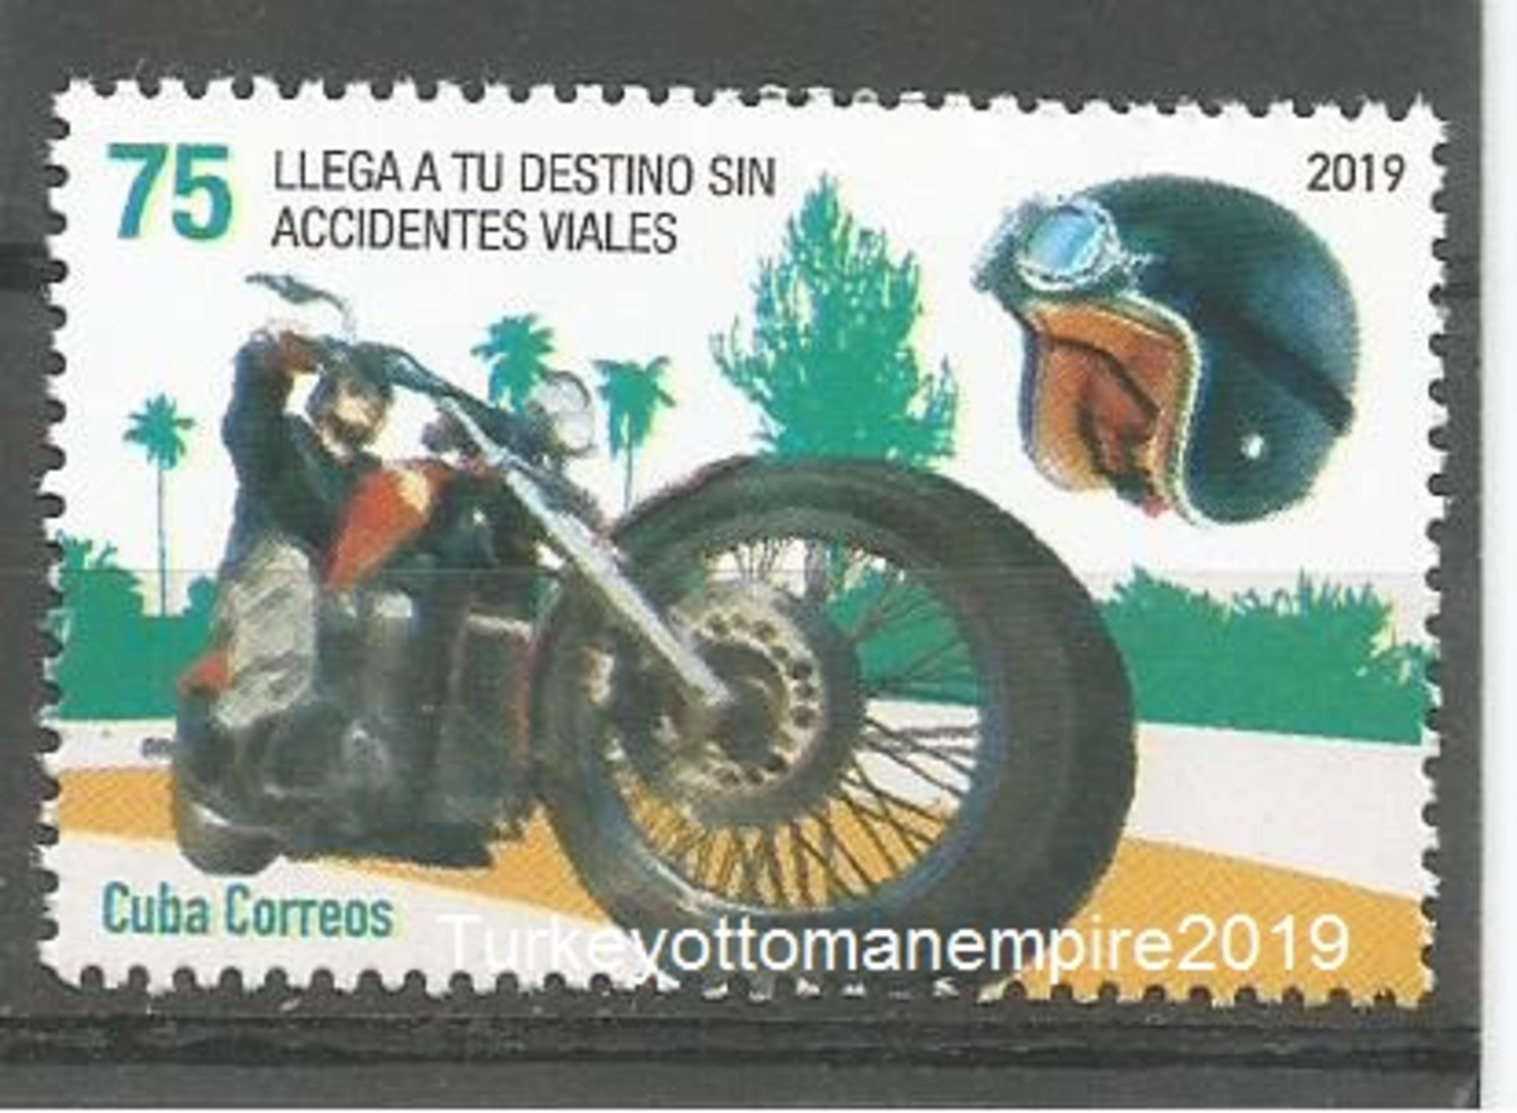 Cuba 2019 Arrive To Your Destiny Without Accidents (Motorcycle) 1v MNH - Accidentes Y Seguridad Vial